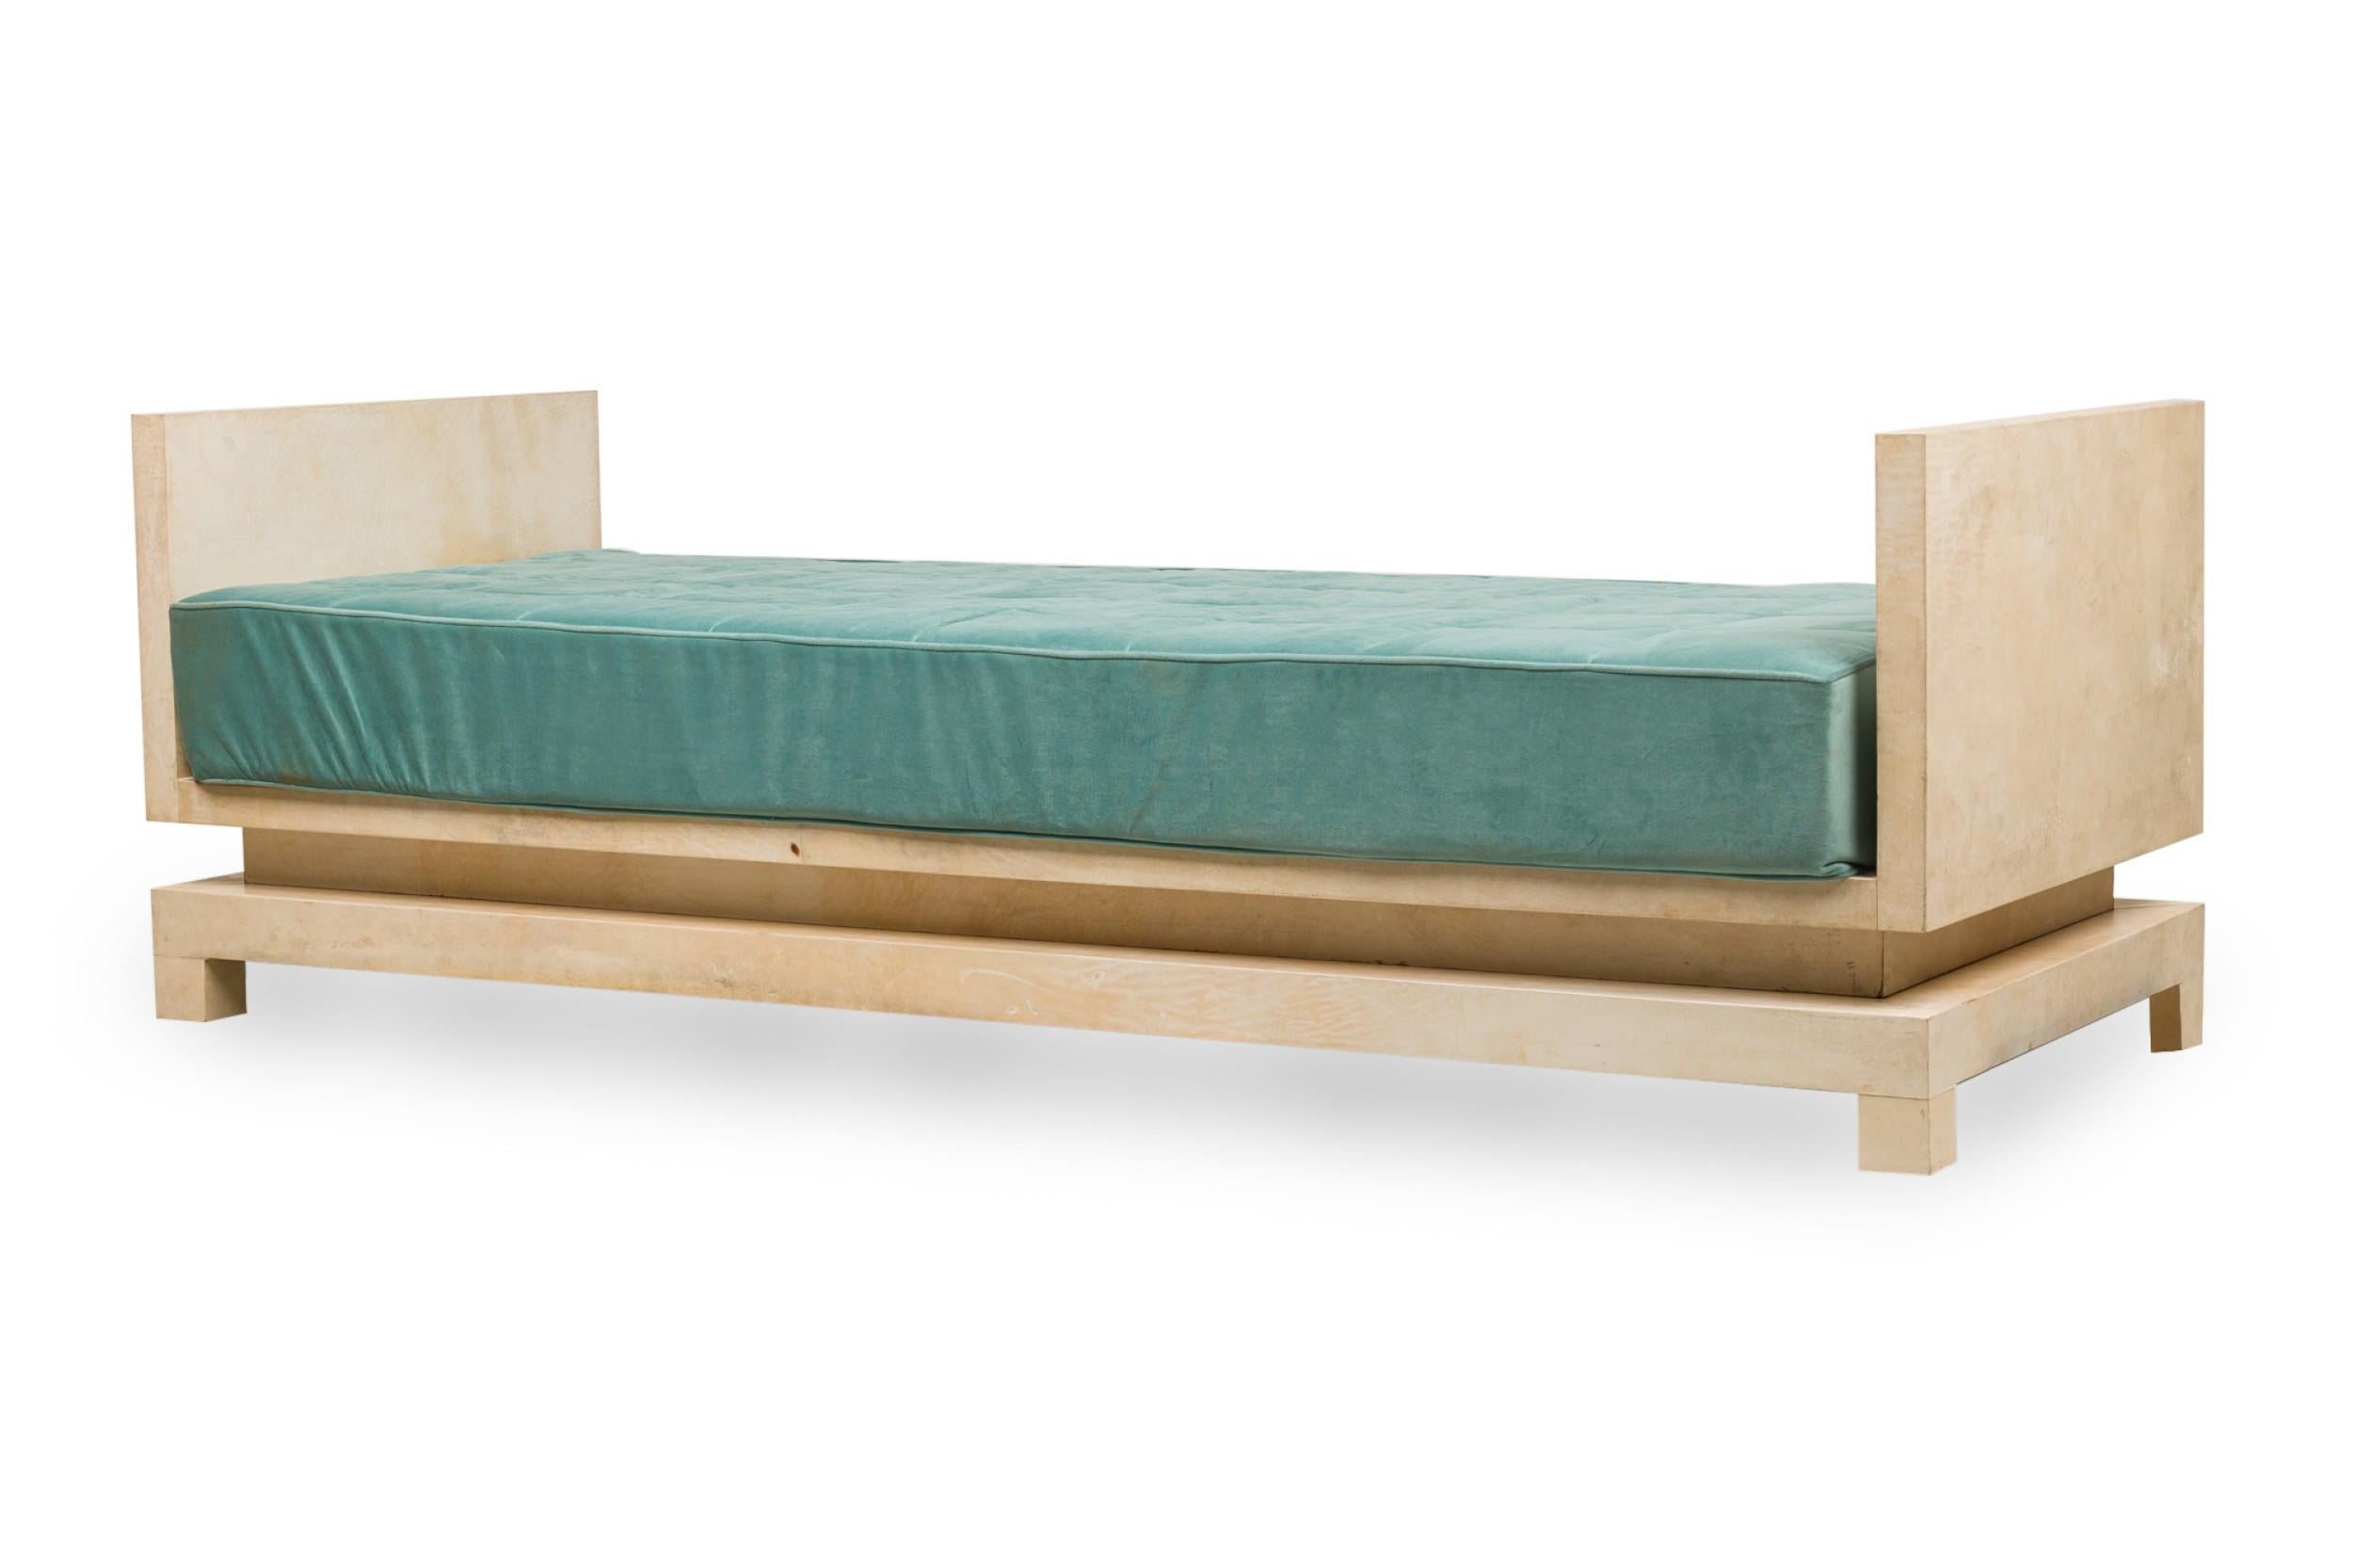 Midcentury American parchment-covered rectangular daybed in a modern geometric style on a raised platform with an upholstered, tufted seat cushion in a light turquoise fabric, resting on 4 block legs. (In the manner of Samuel Marx).